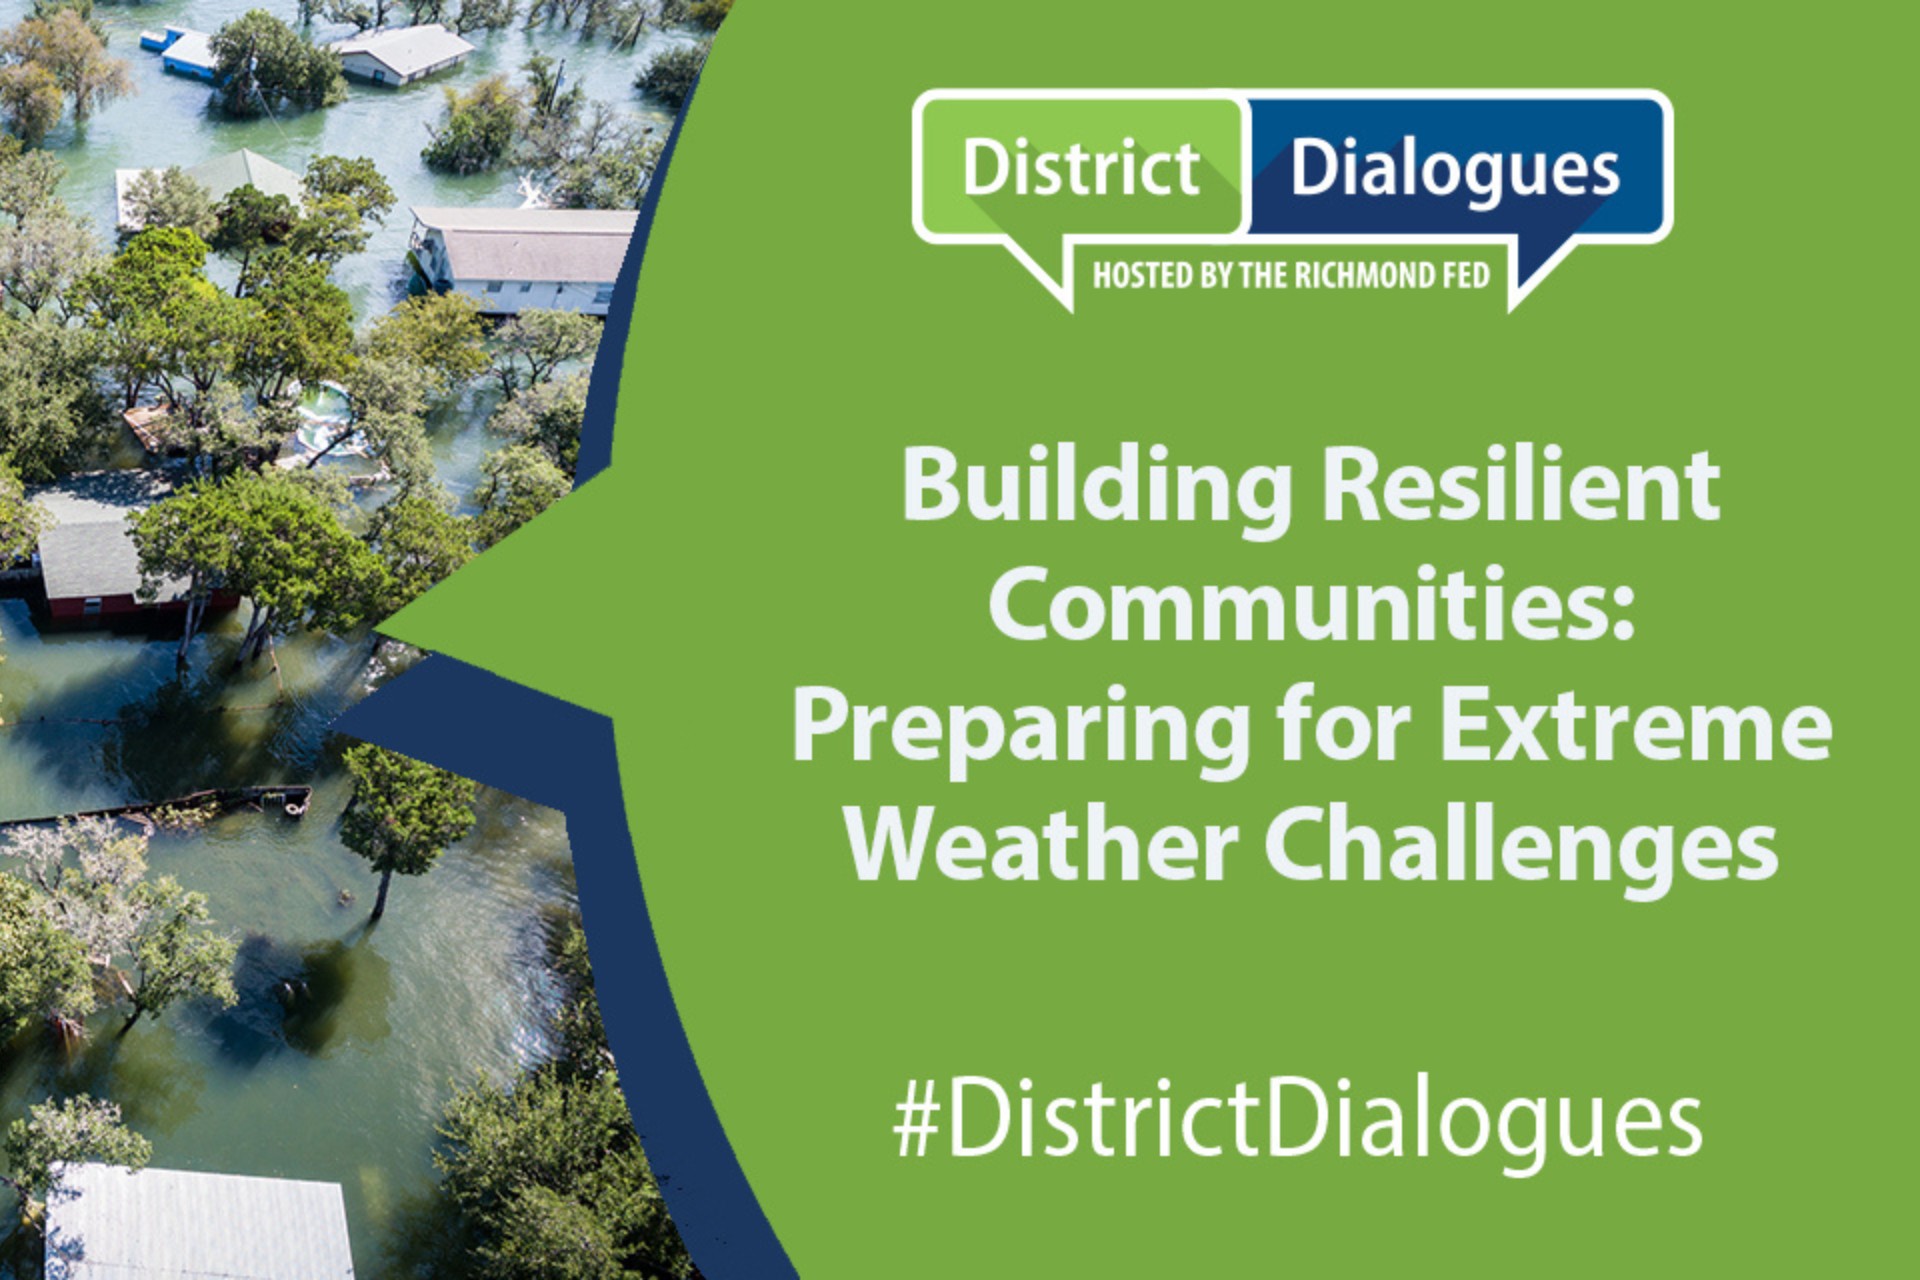 Building Resilient Communities: Preparing for Extreme Weather Challenges